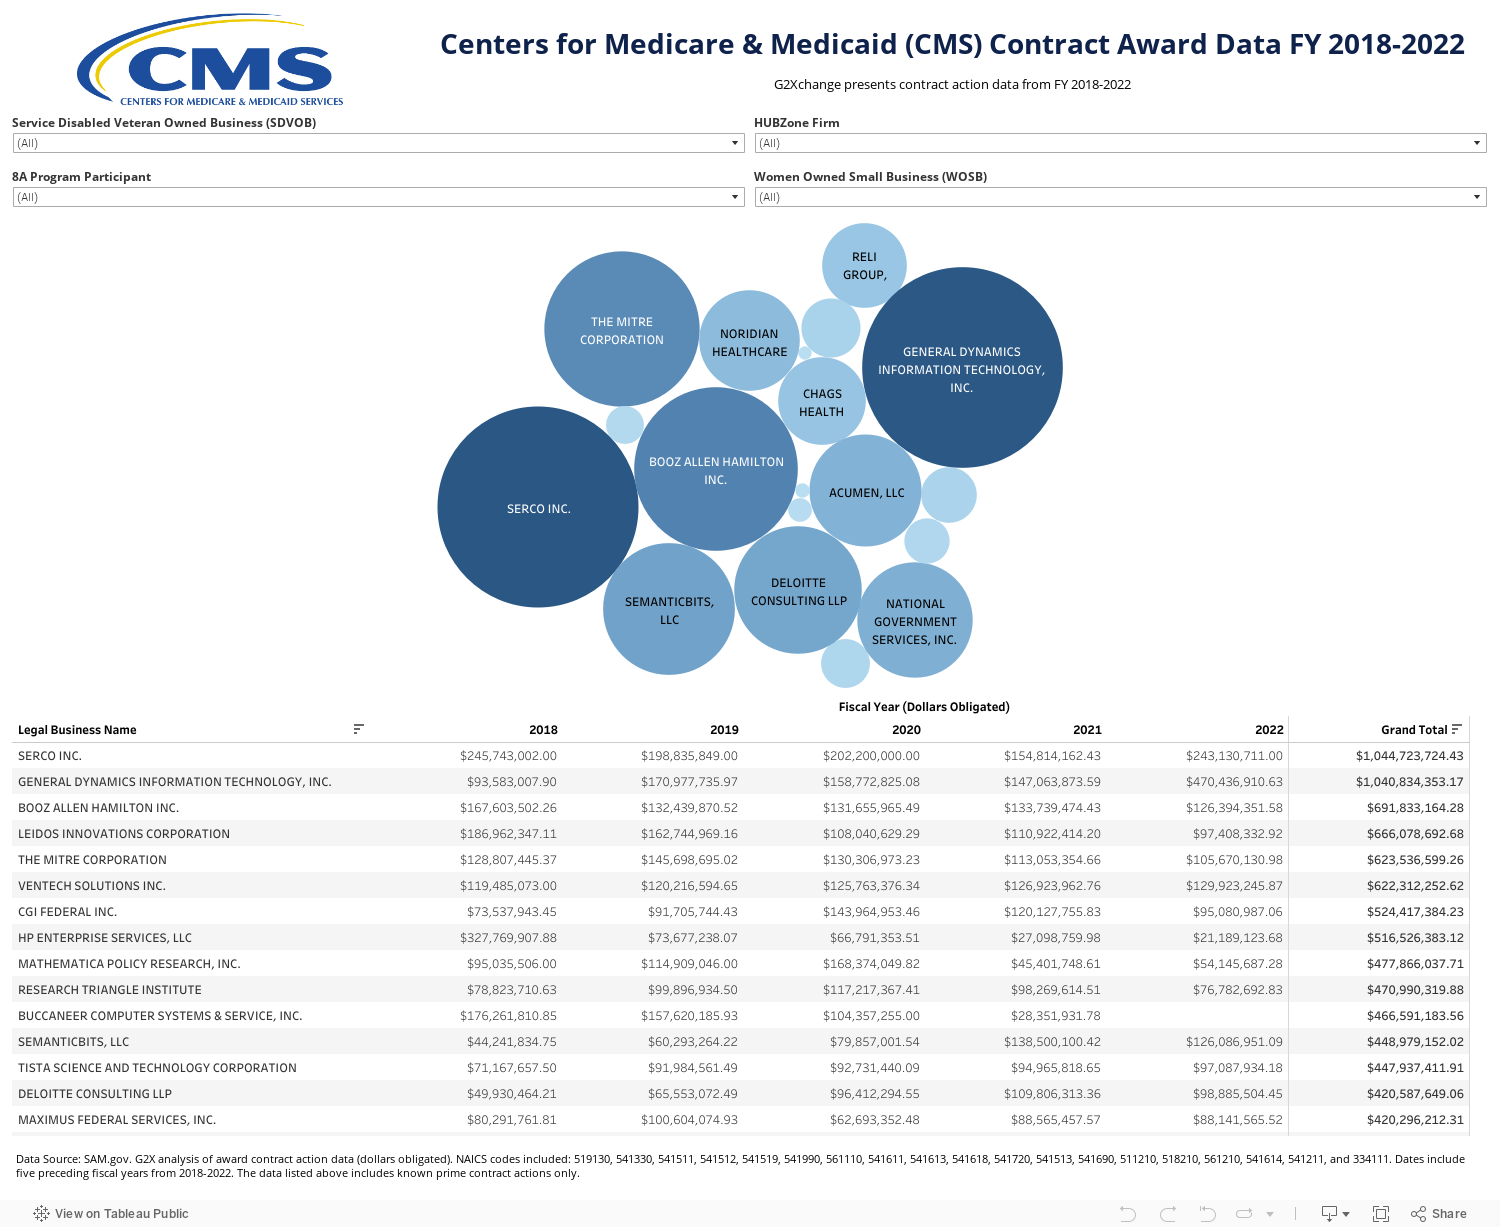 Centers for Medicare & Medicaid (CMS) Contract Award Data FY 2018-2022